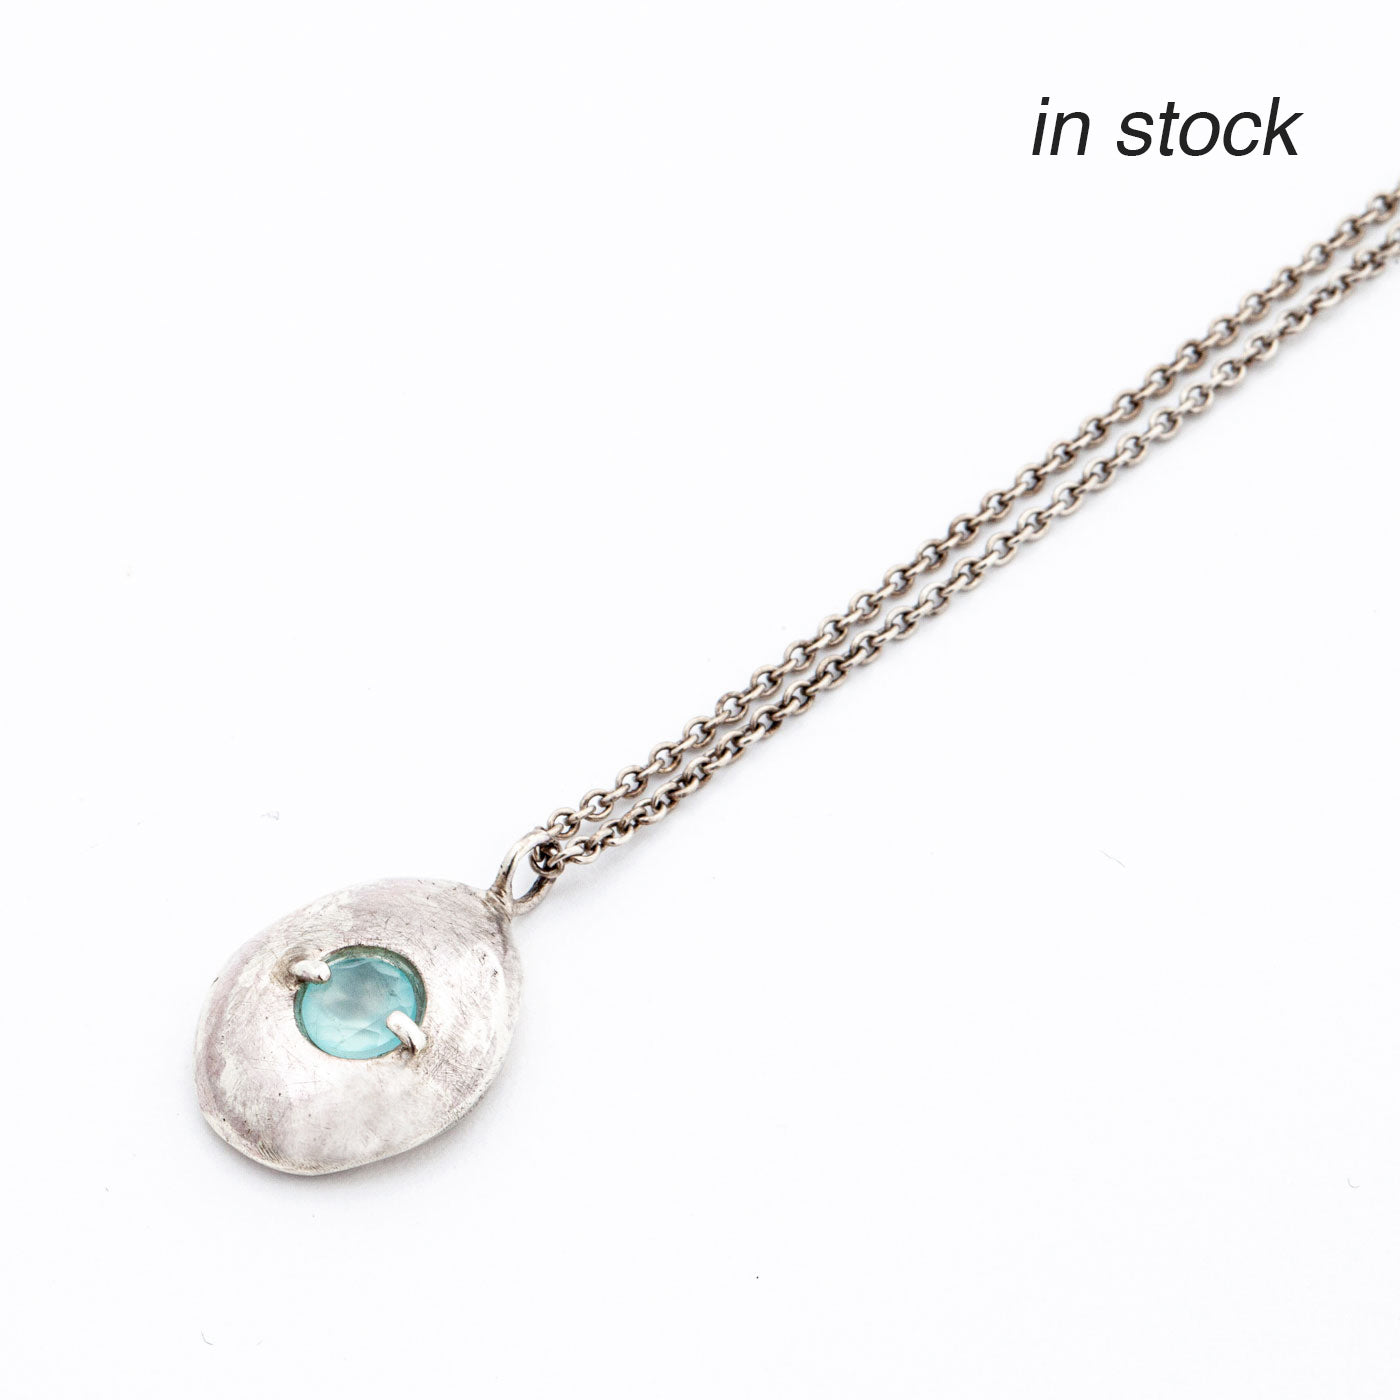 pendant lagoon silver blue chalcedony product view innan jewellery in stock